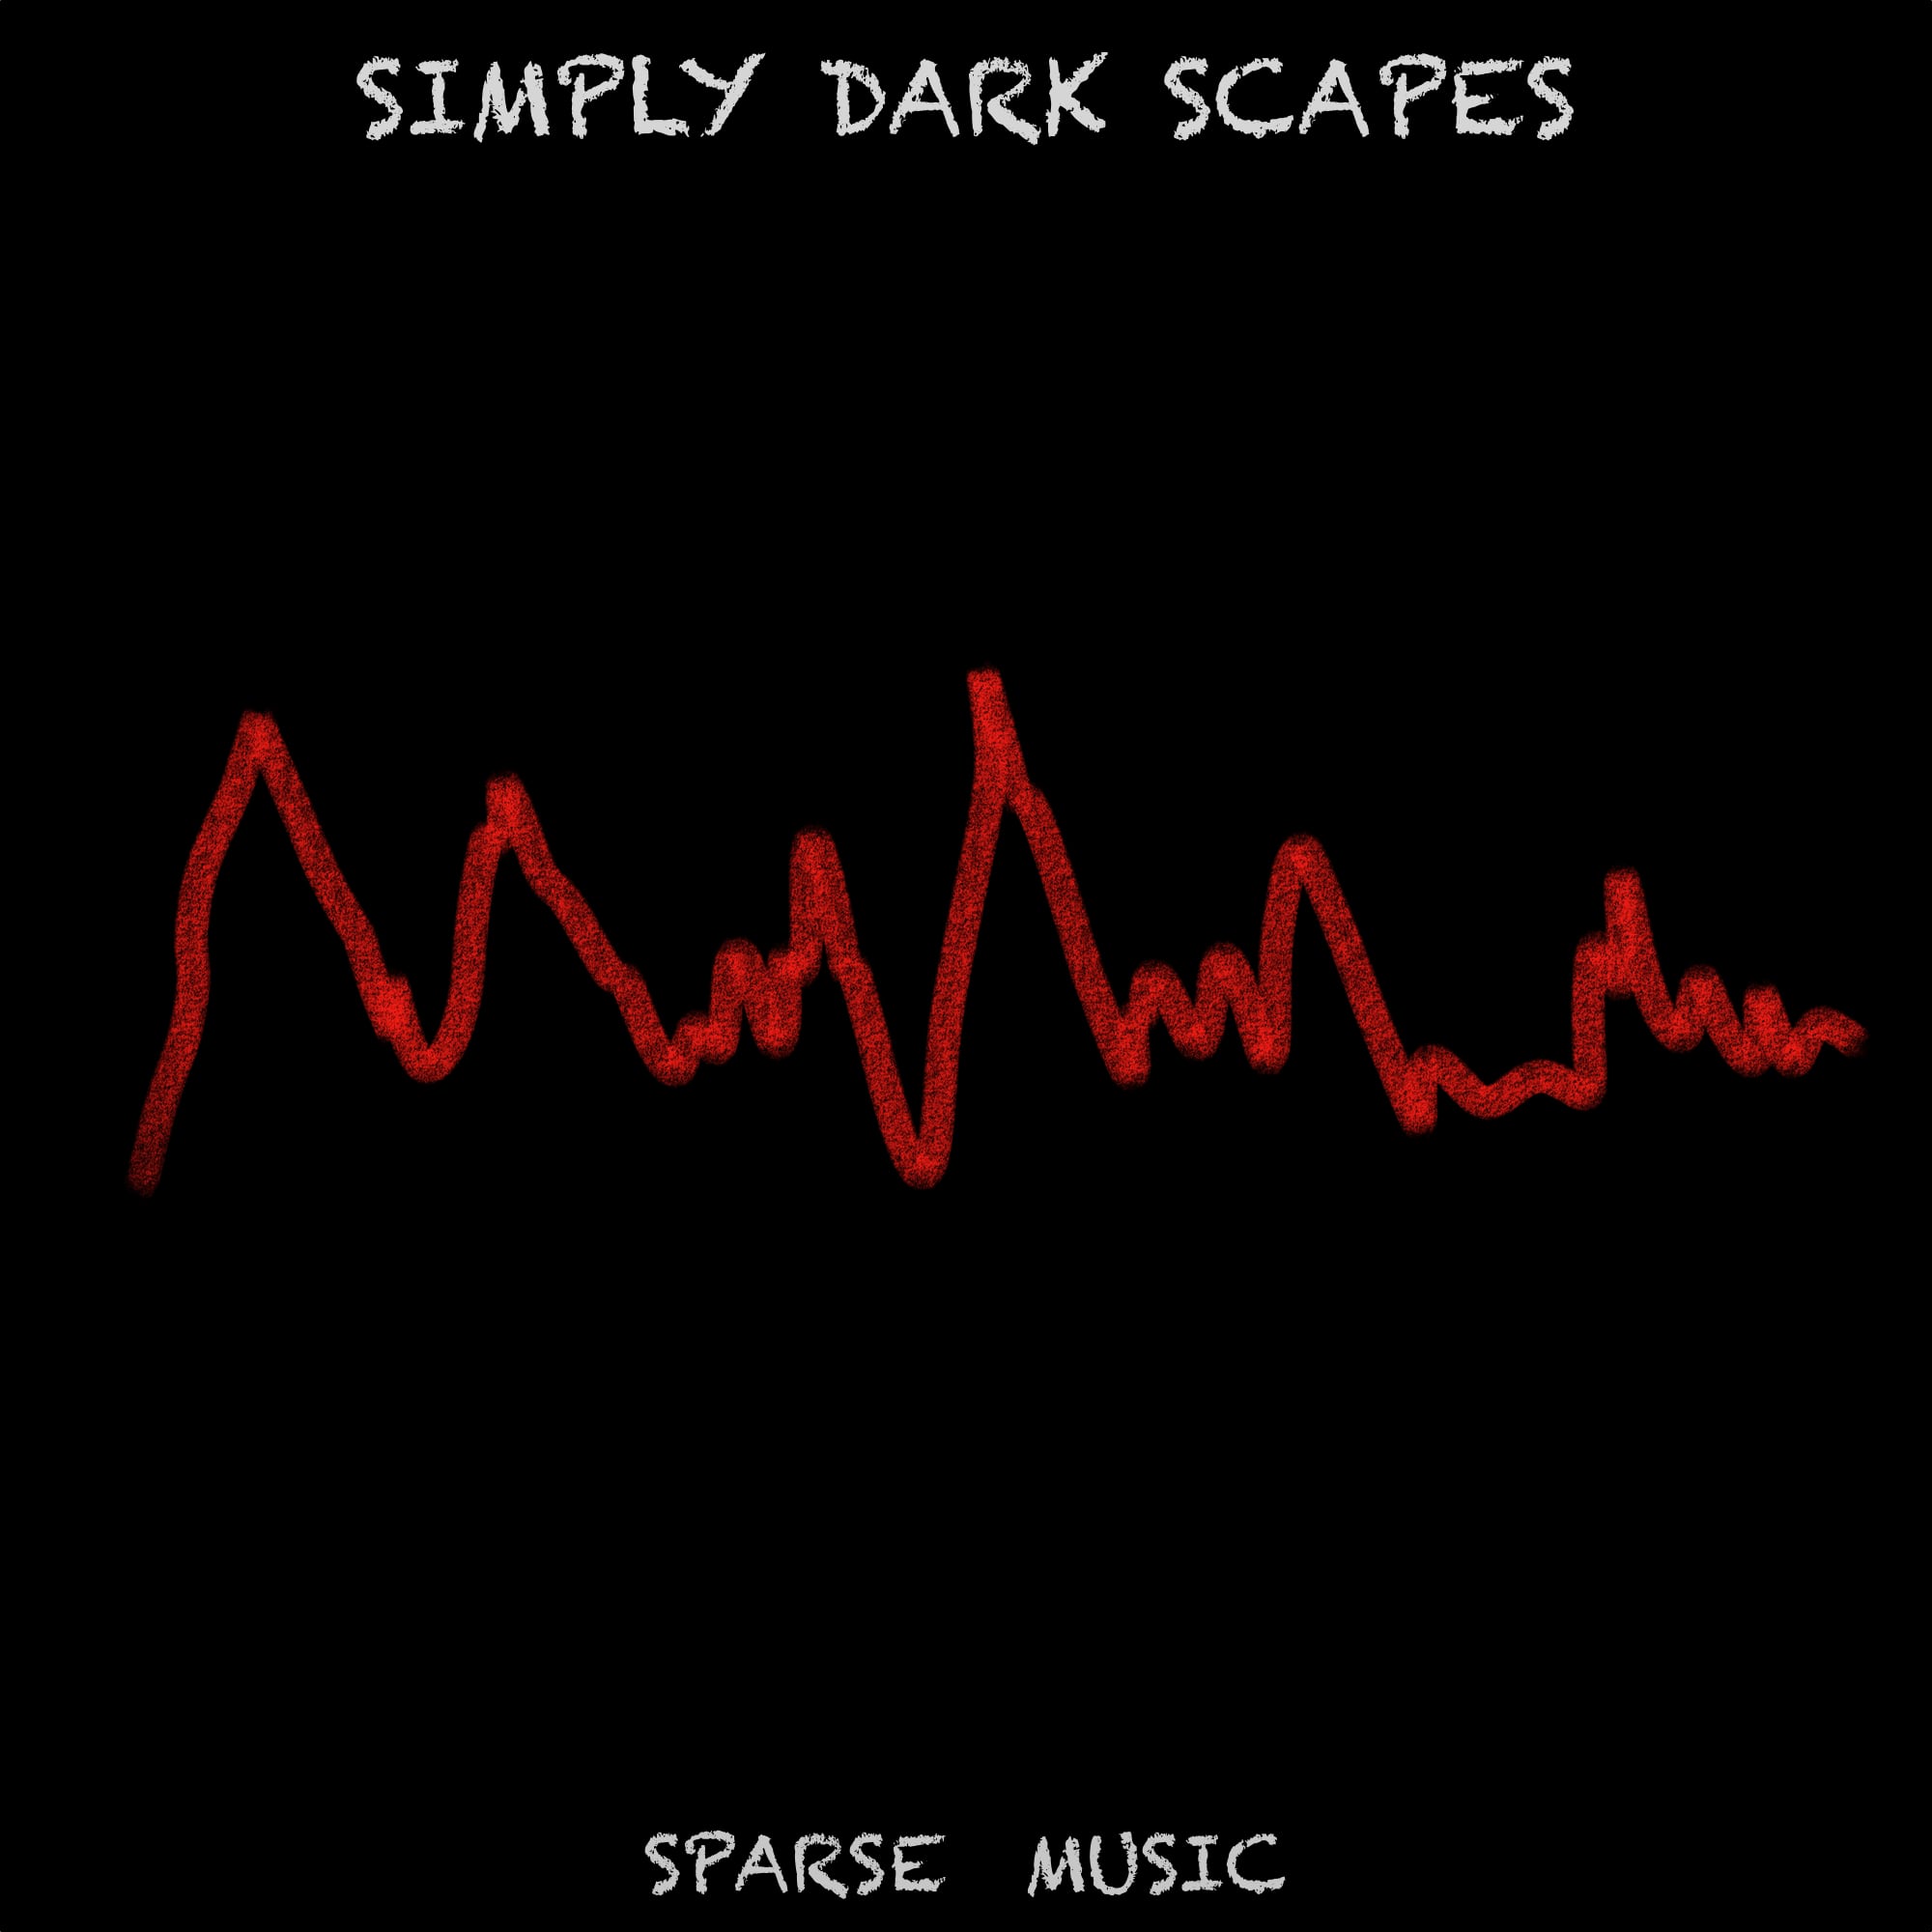 SPRS 01071 Simply Dark Scapes 2000